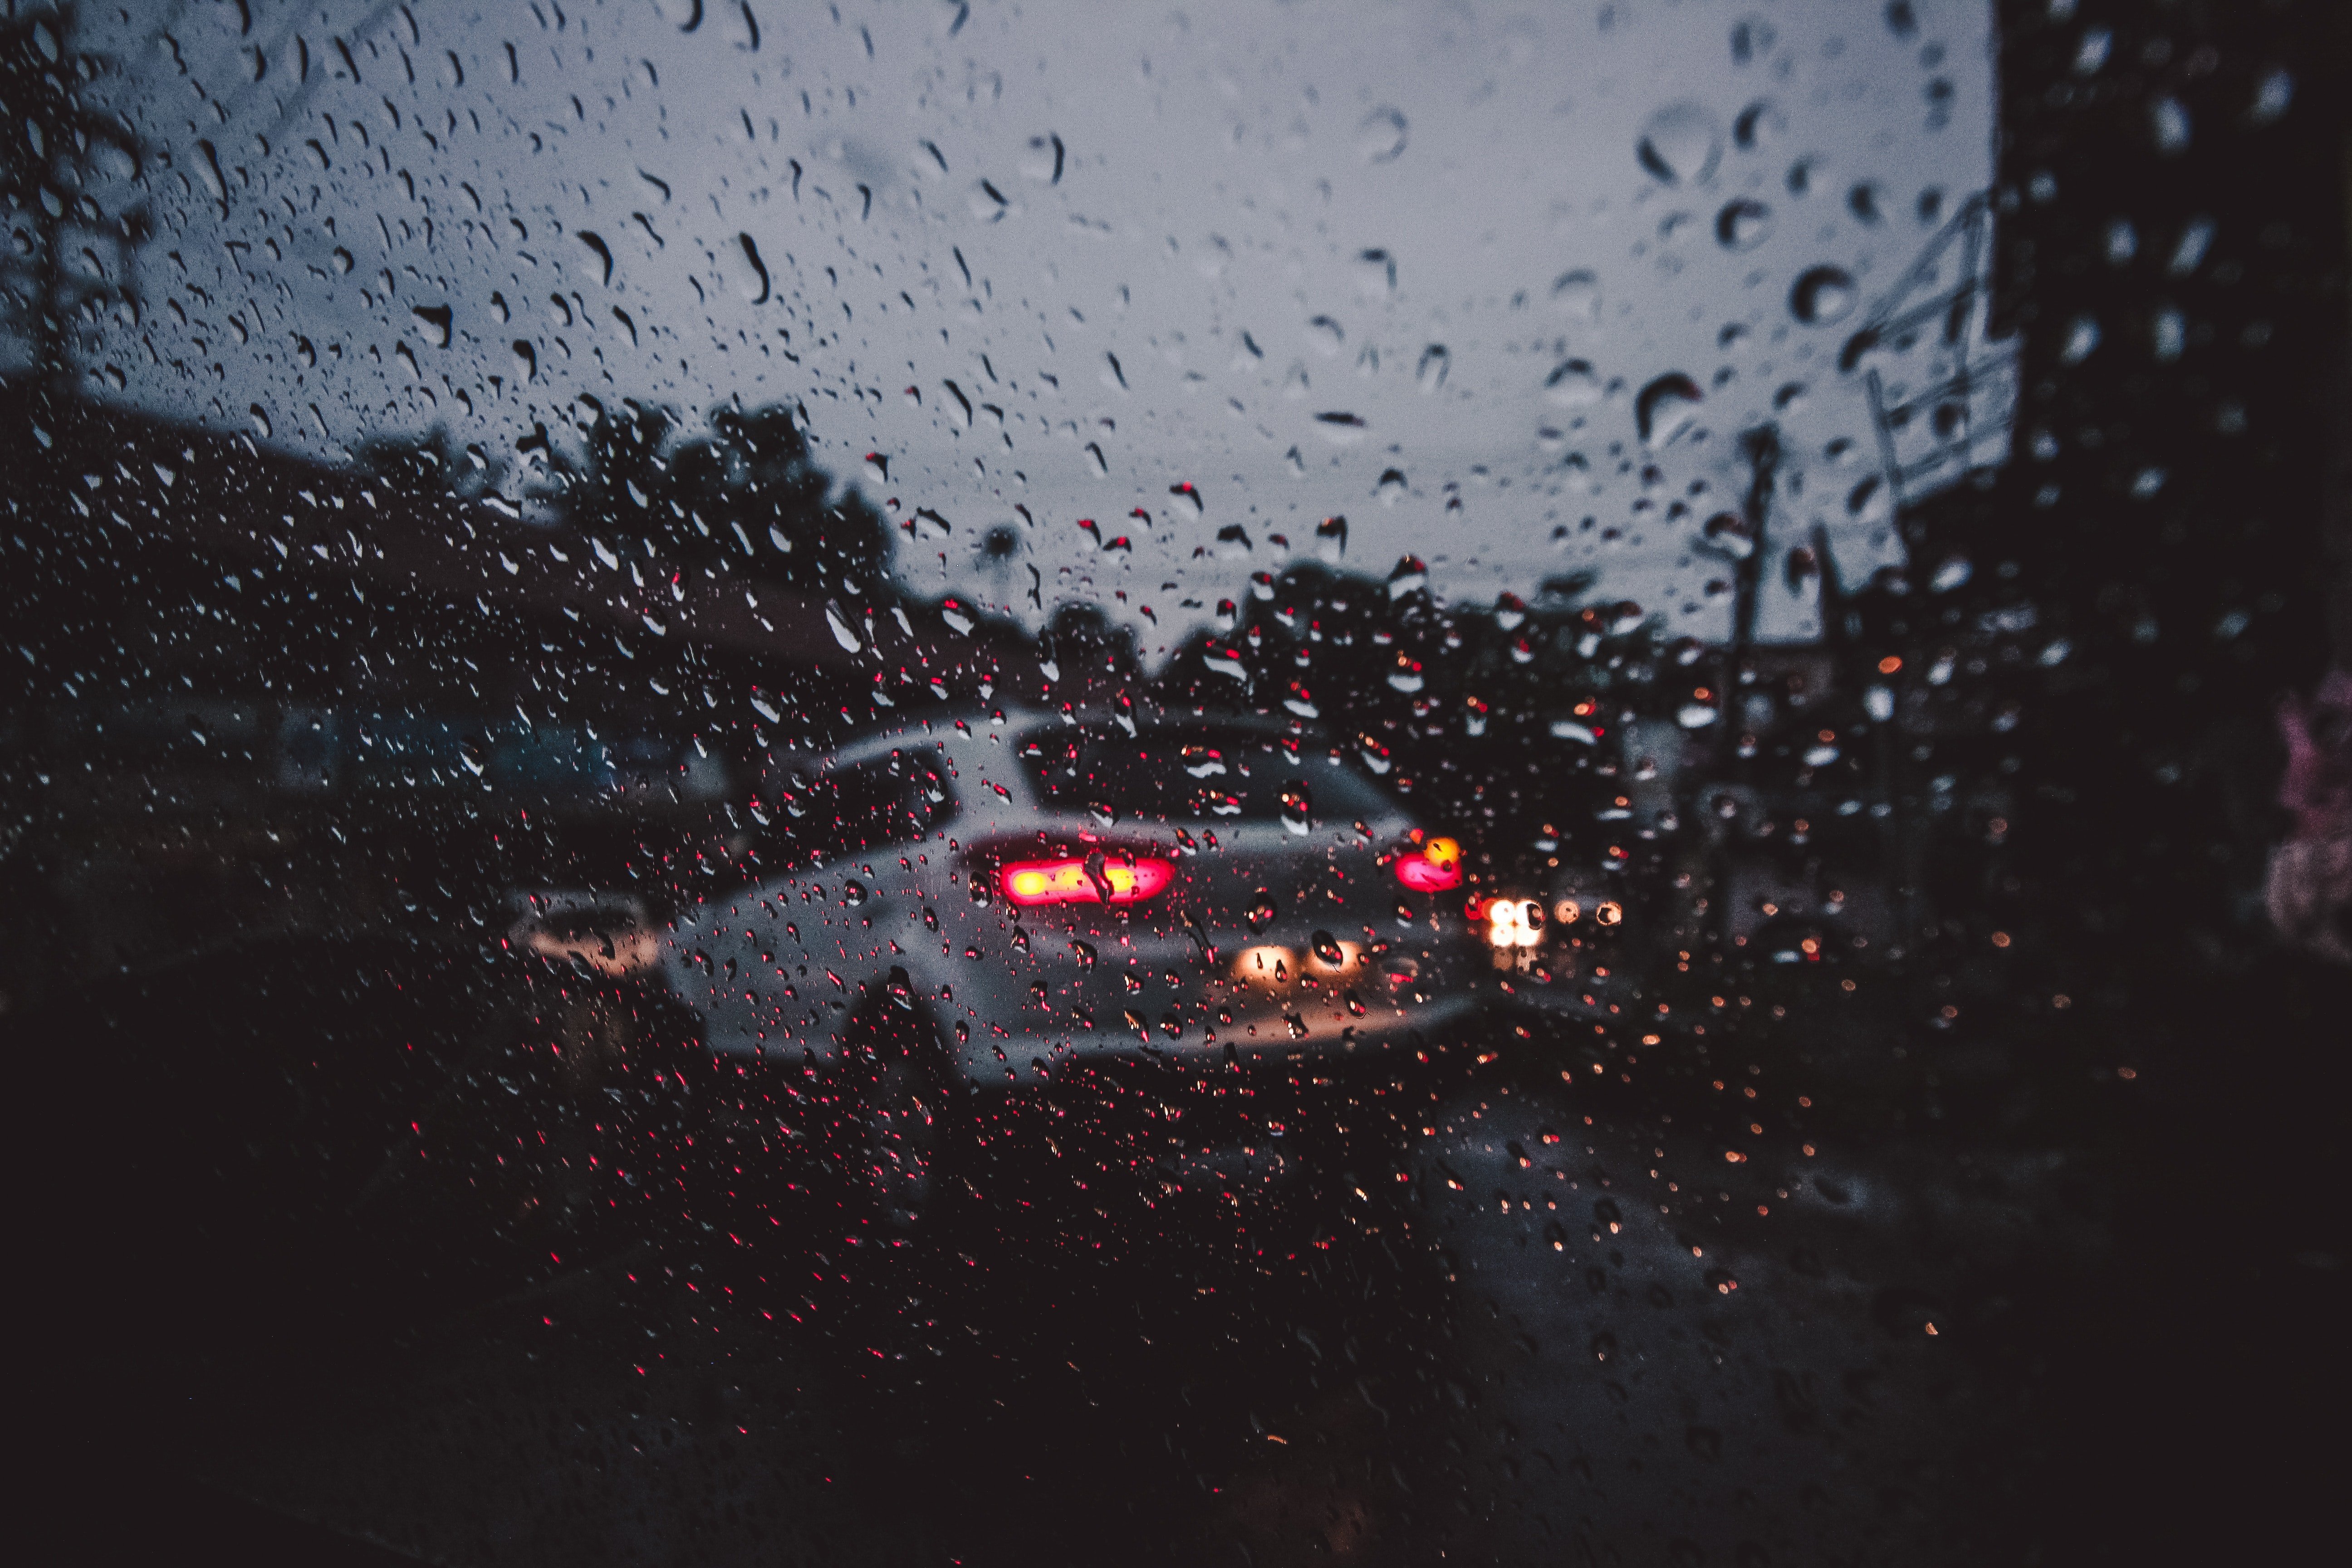 David was driving home on a rainy day when he noticed two kids walking without an umbrella. | Source: Pexels